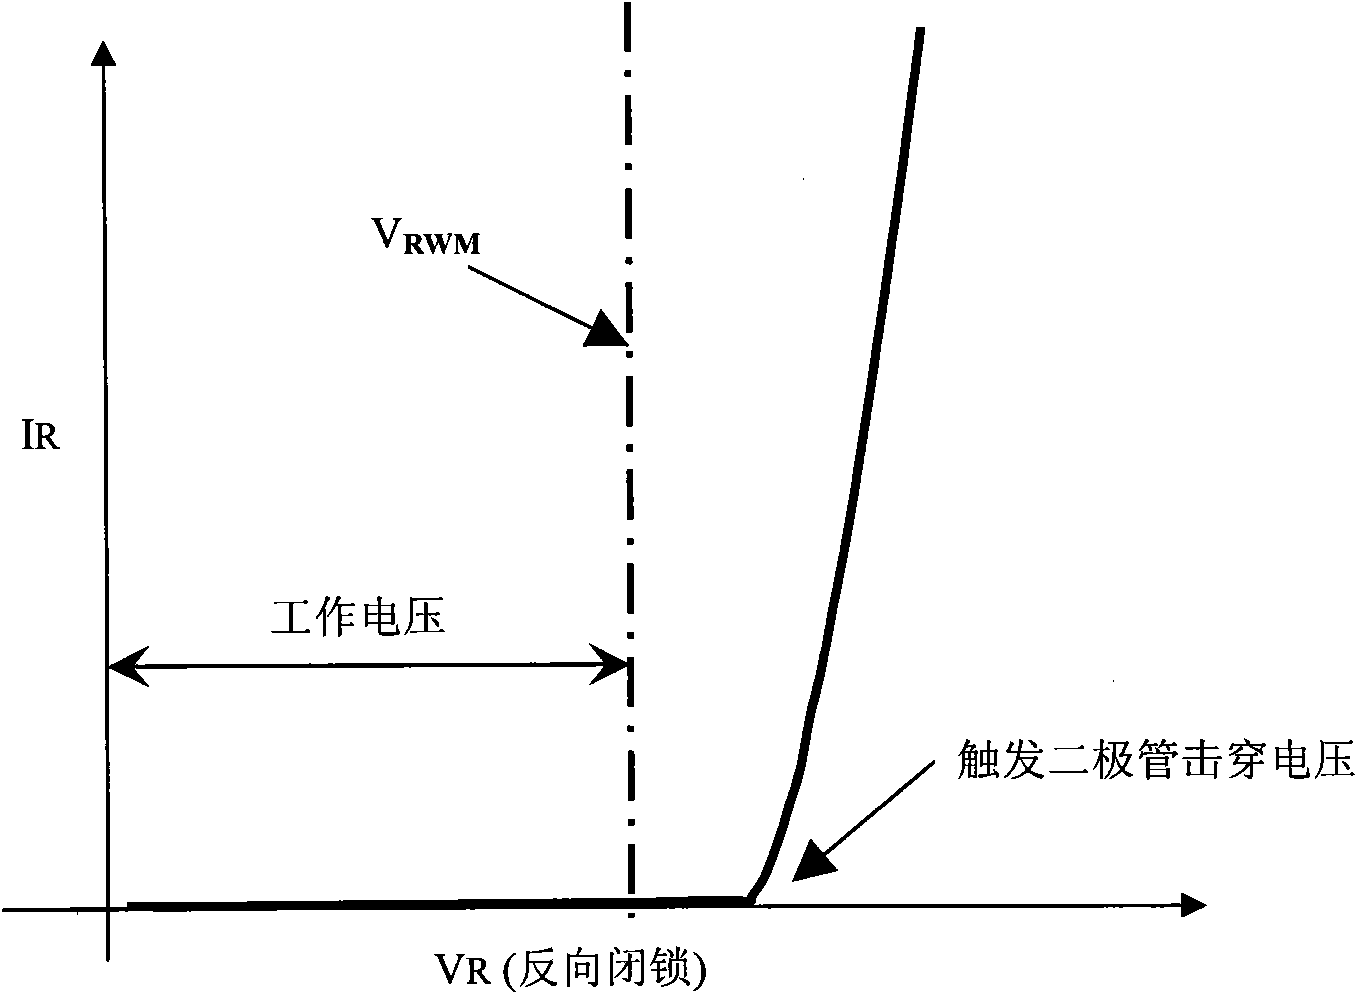 Transient voltage suppressor (TVS) with improved clamping voltage